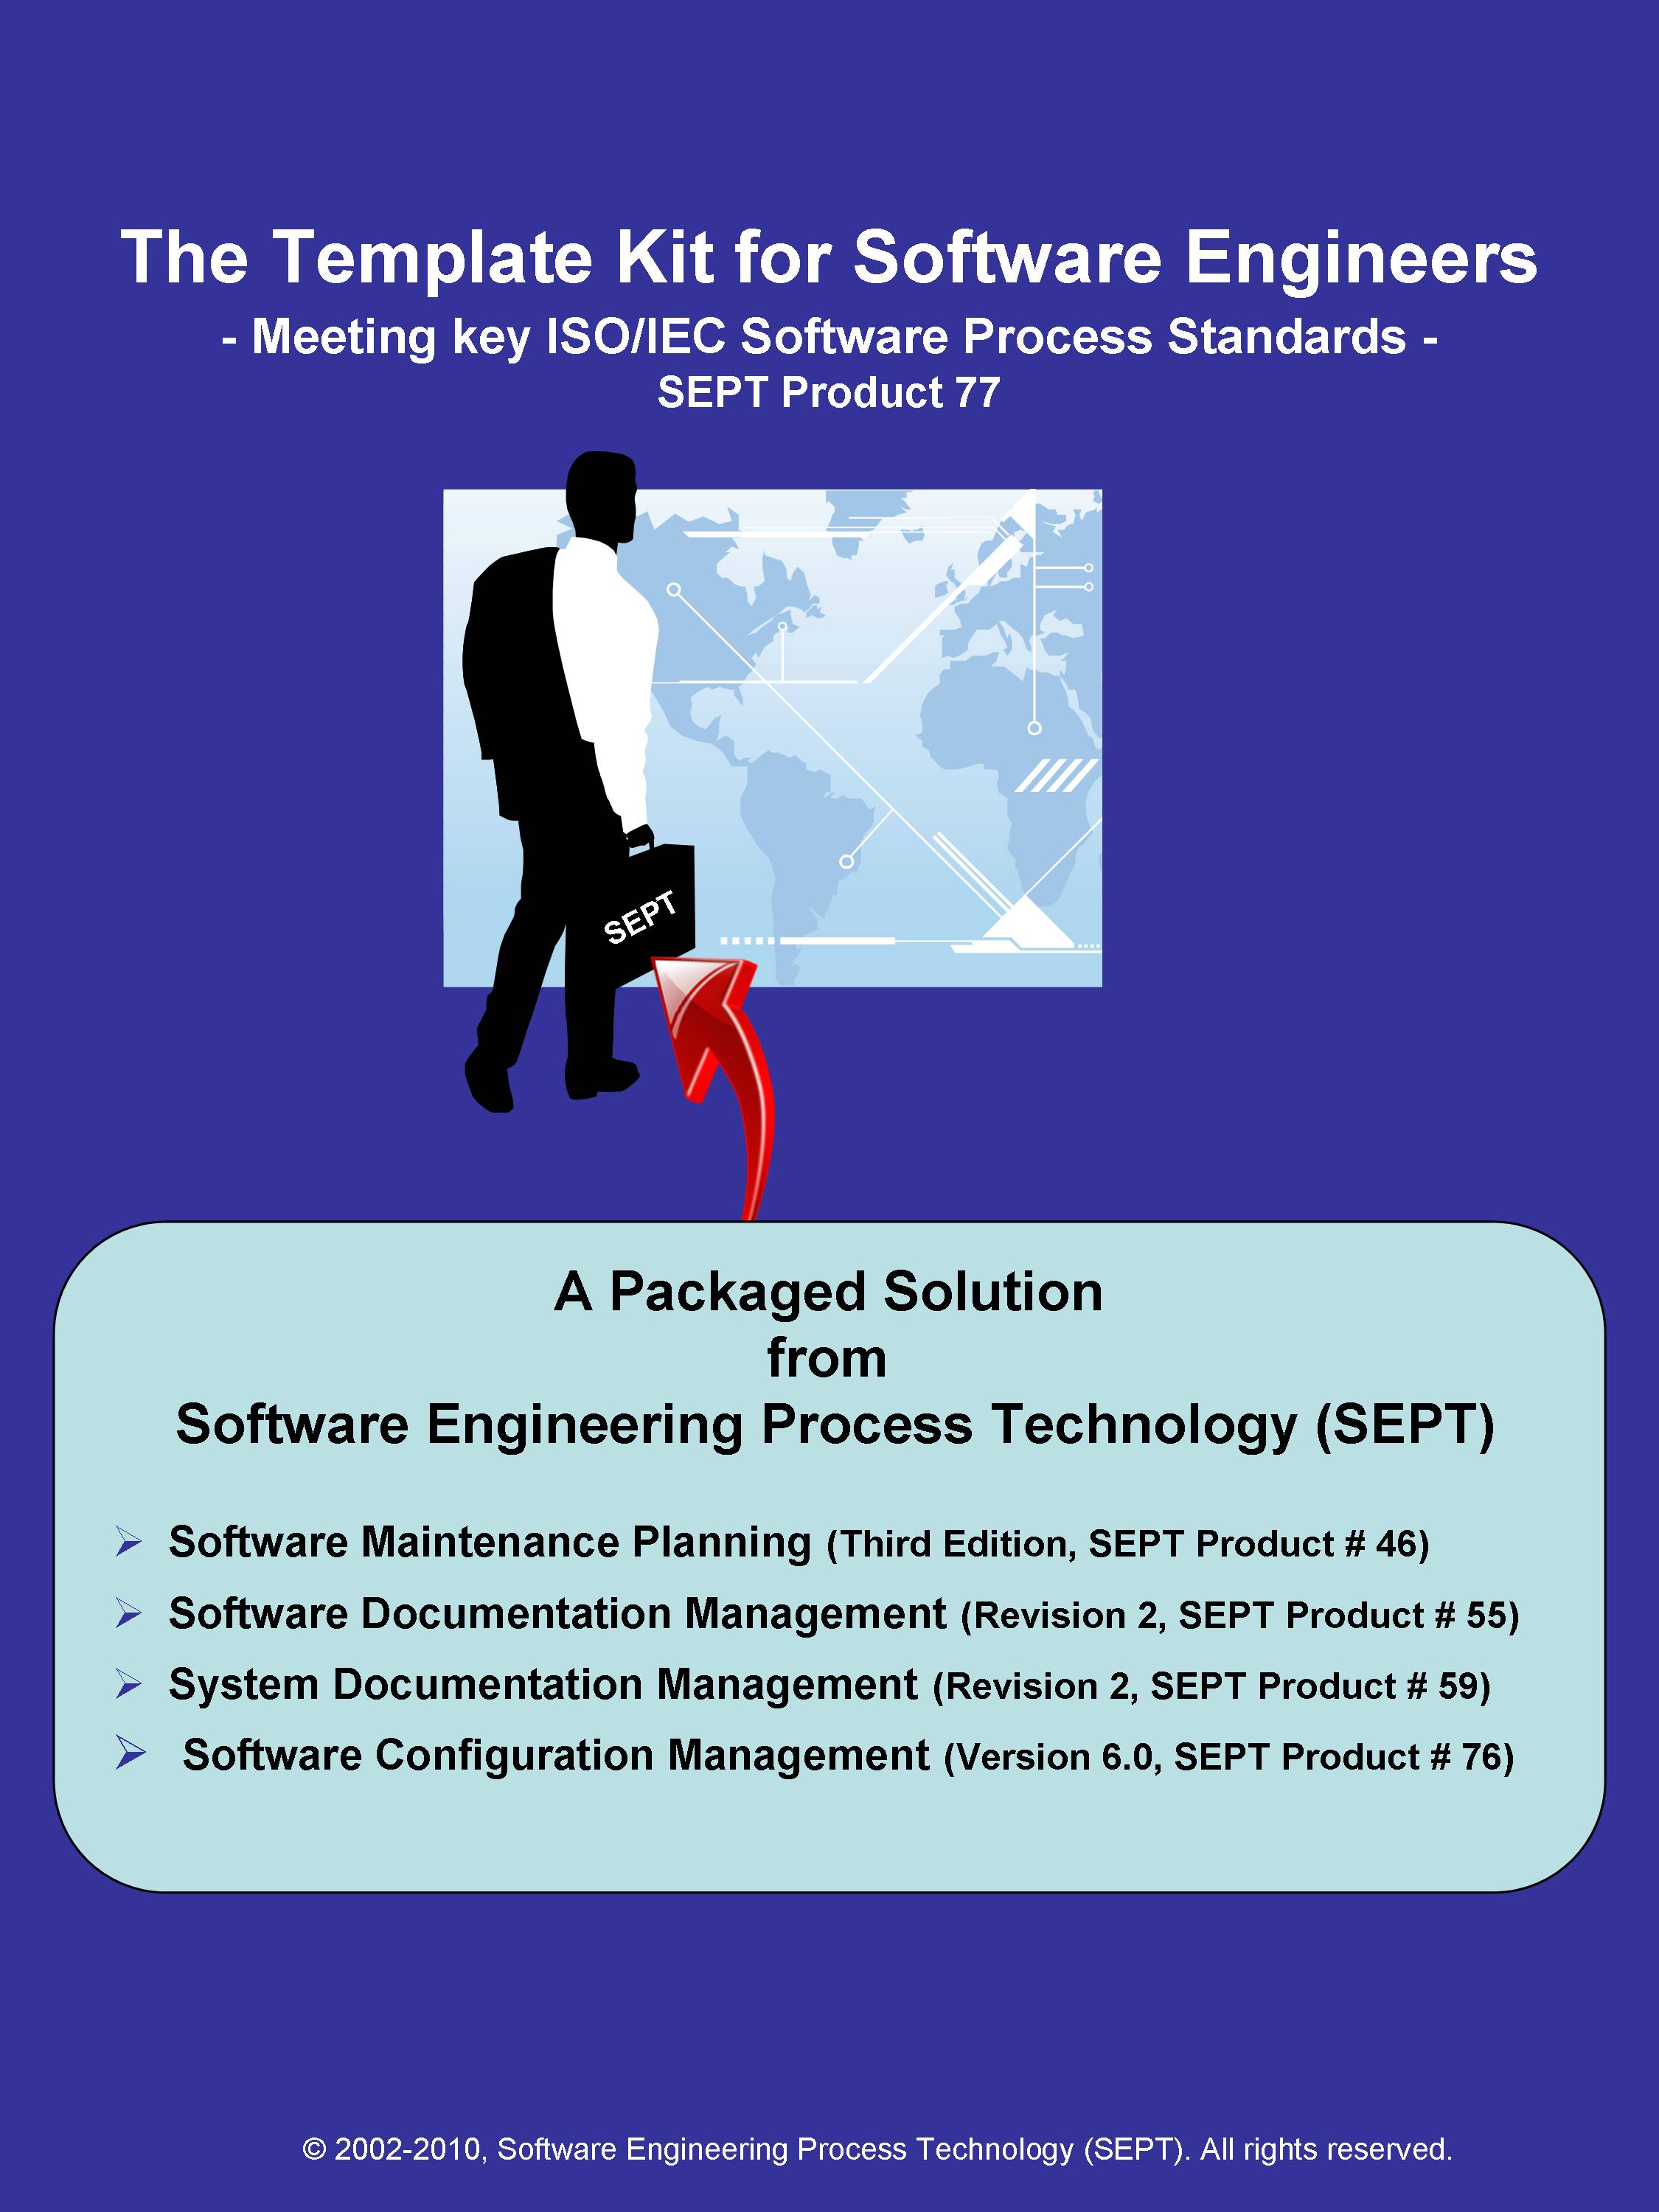 A Software Engineering Kit – Composed of Templates for Key Software Engineering Process Plans